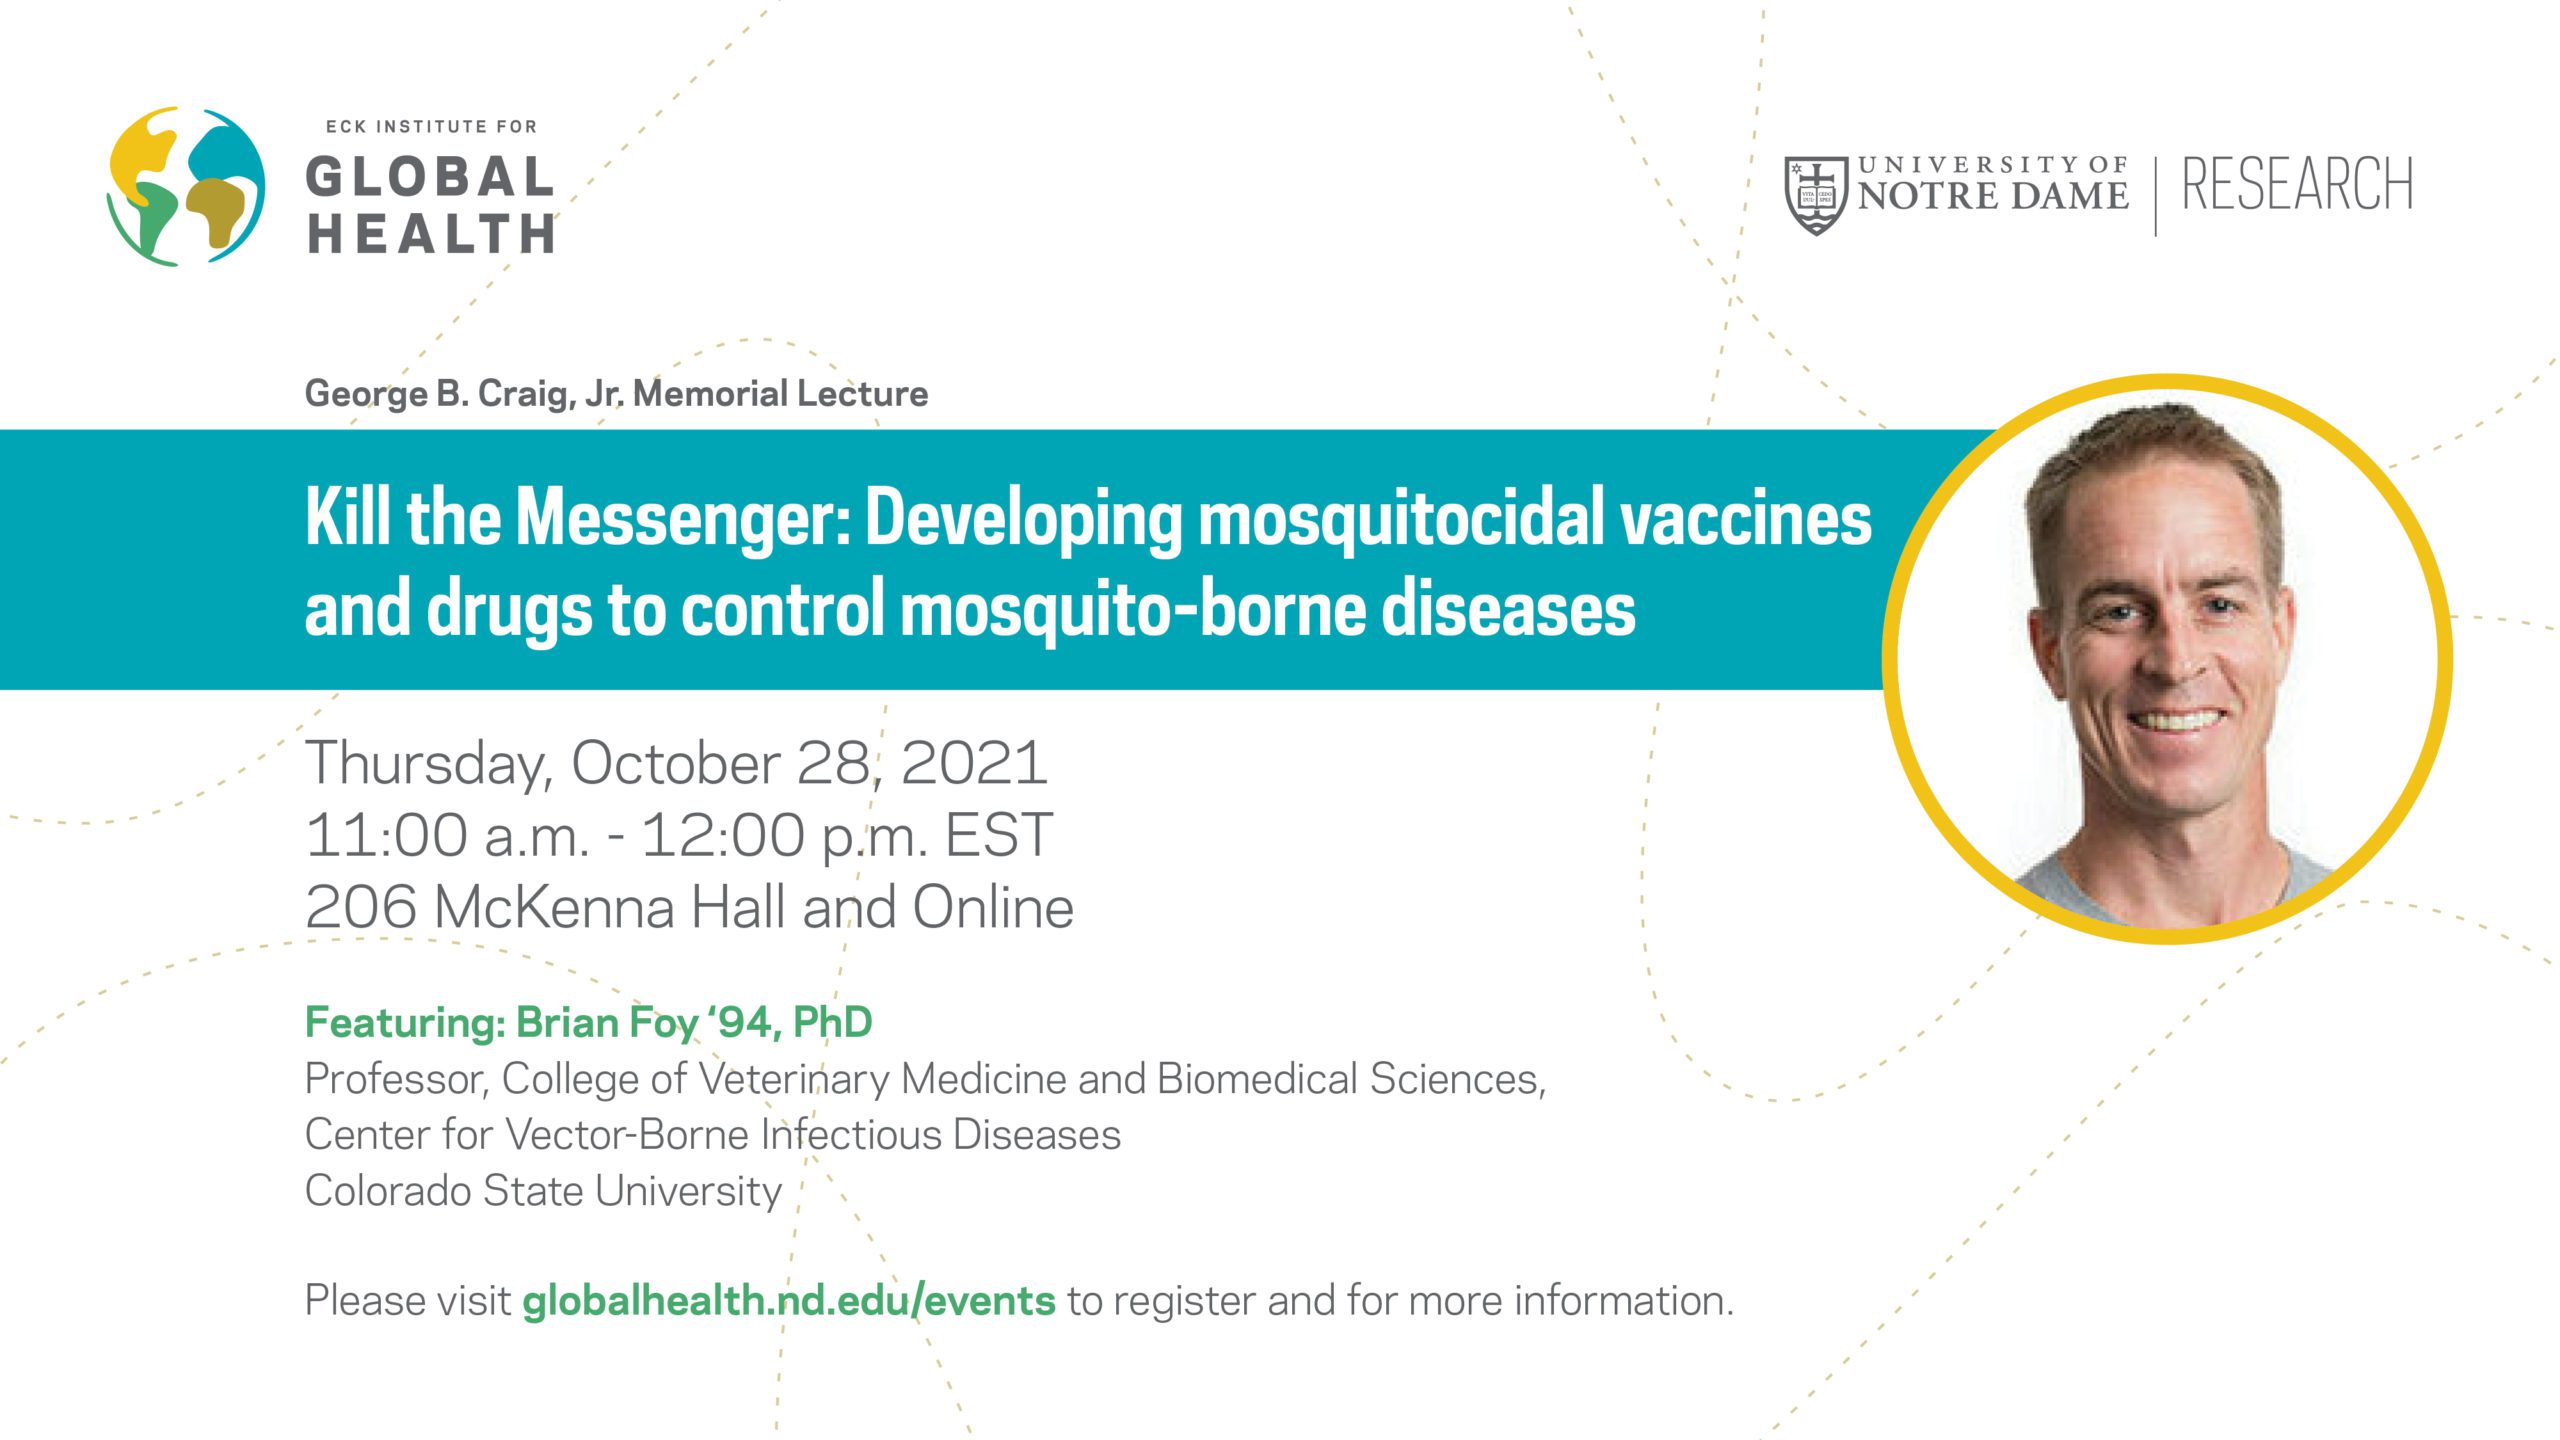 George B. Craig, Jr. Memorial Lecture: “Kill the Messenger: Developing mosquitocidal vaccines and drugs to control mosquito-borne diseases”